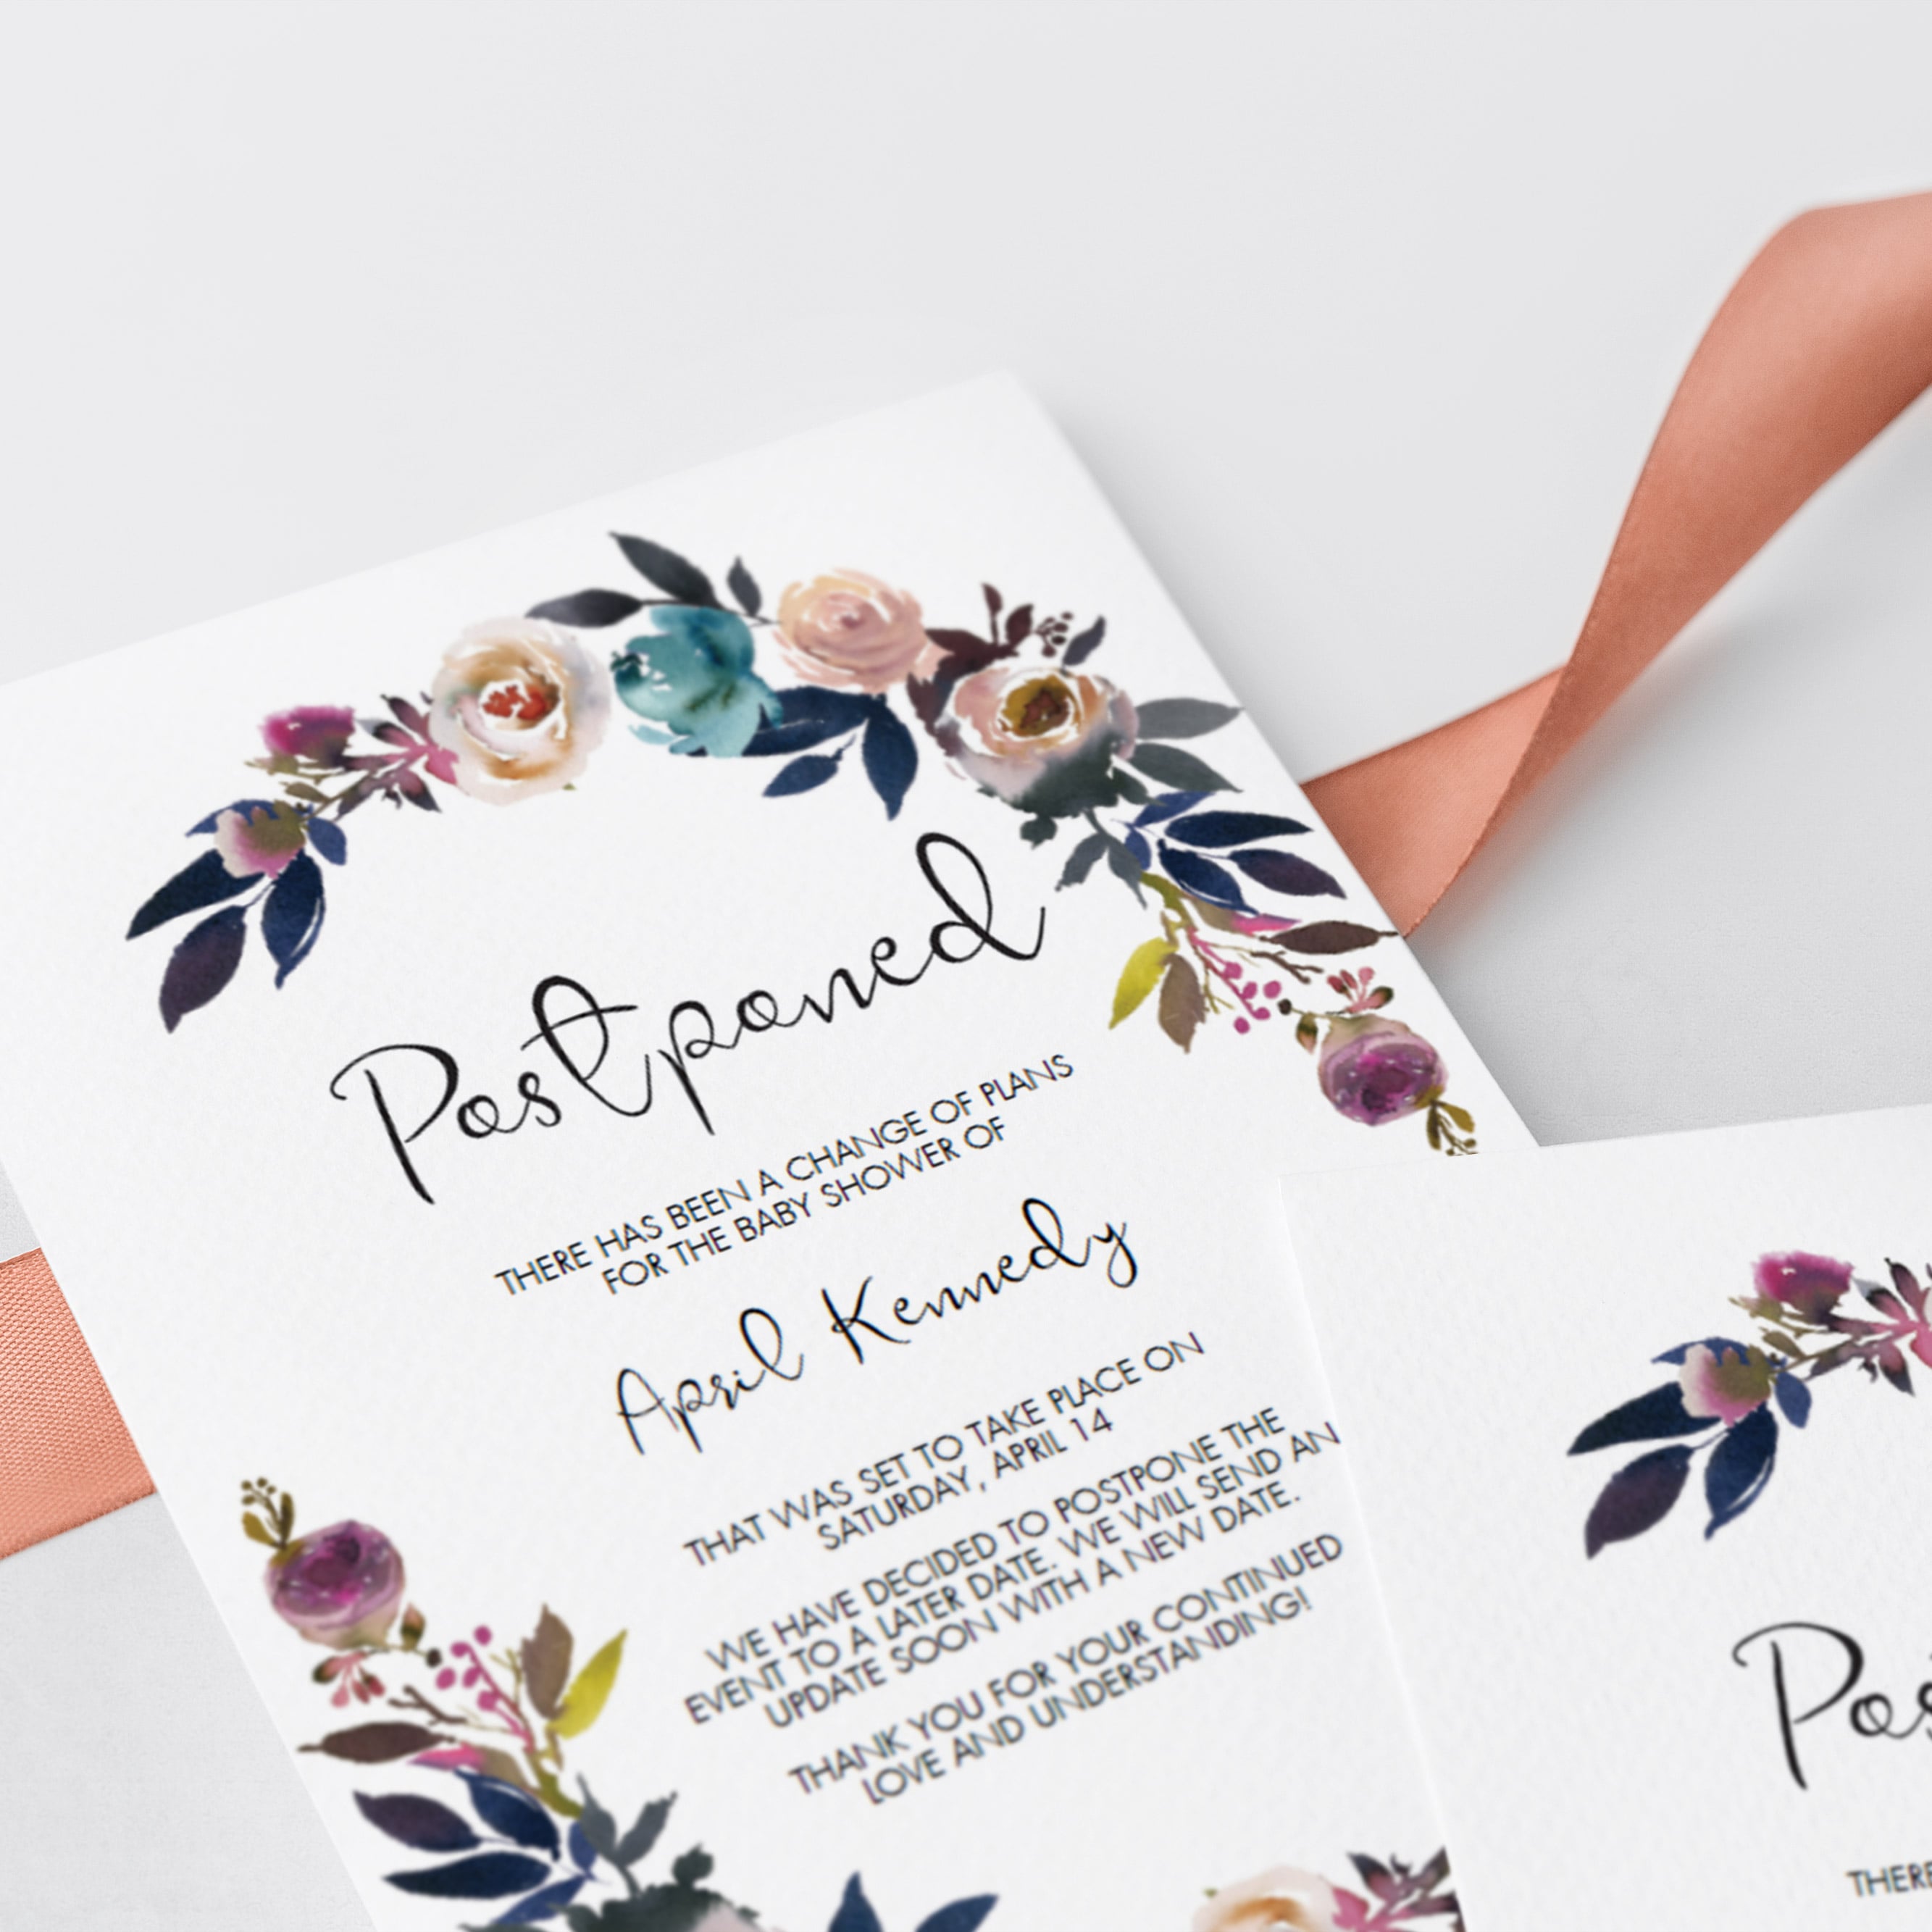 Postponed baby shower card editable pdf template floral theme by LittleSizzle